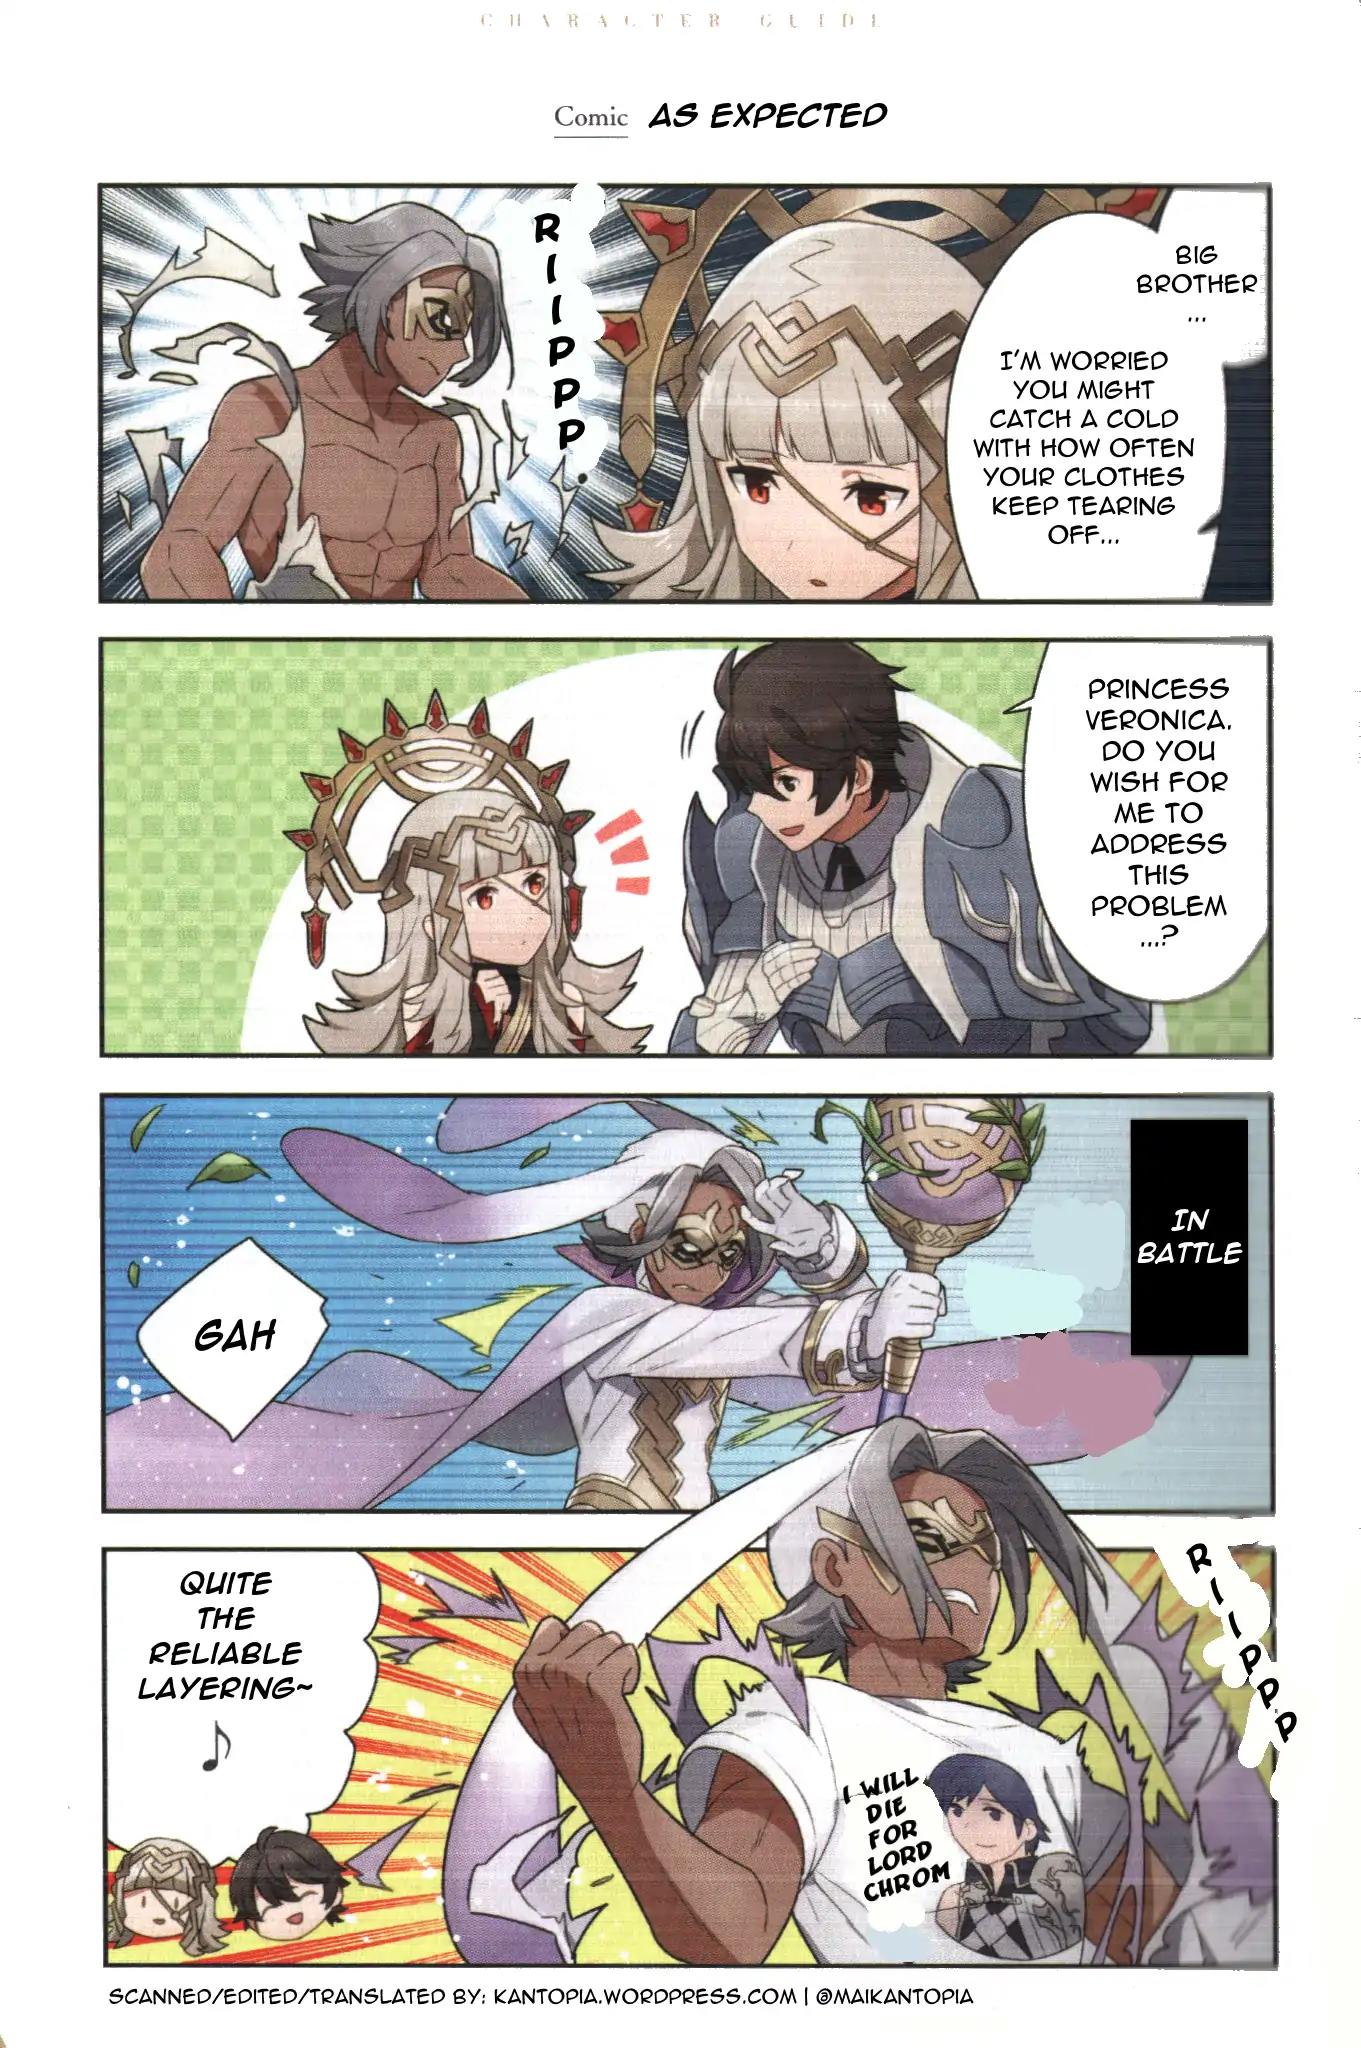 Fire Emblem Heroes Daily Lives of the Heroes Vol.1 Chapter 0.06: Character comic: